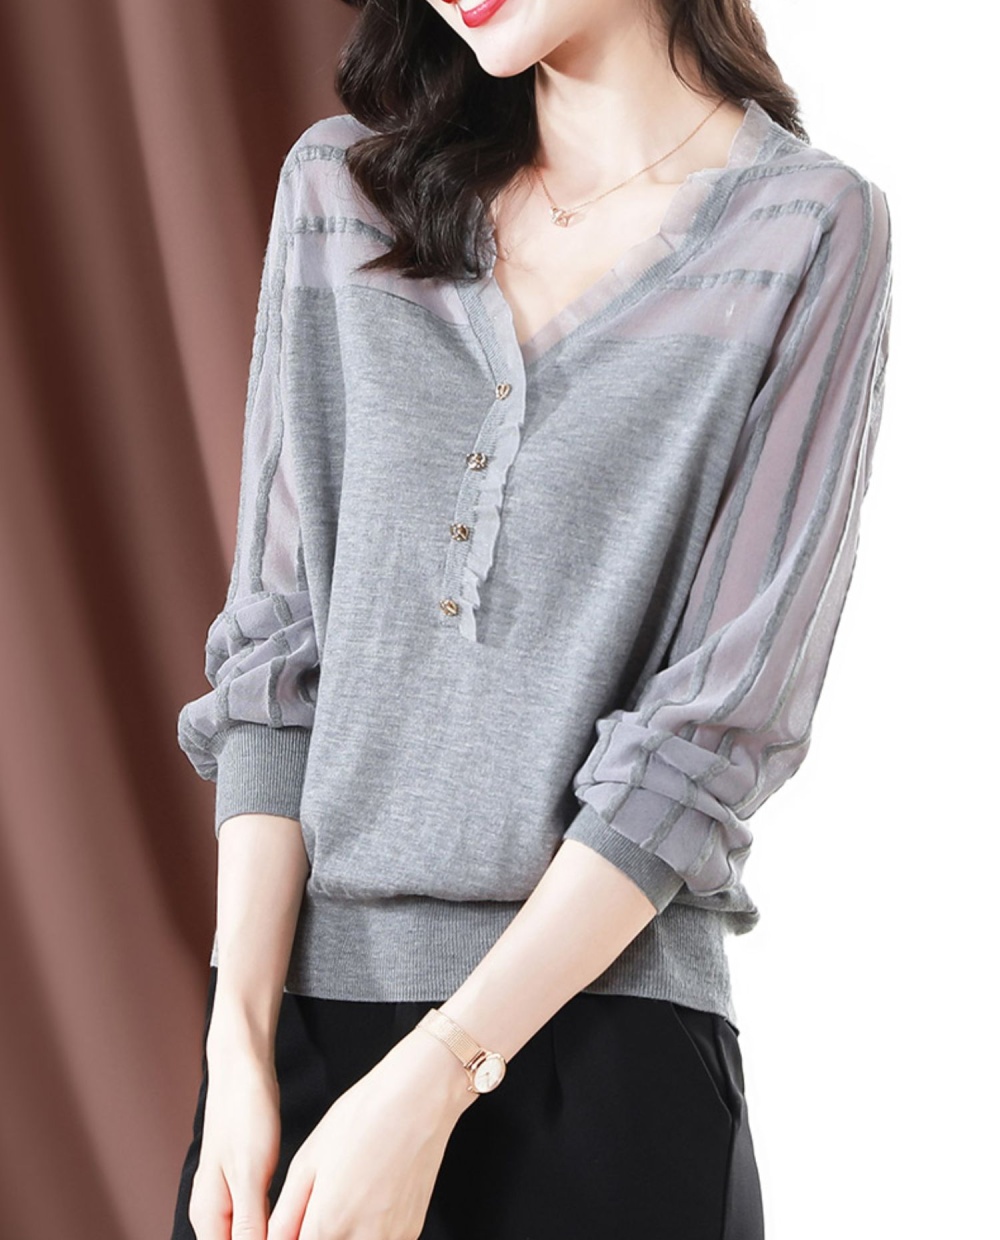 Cashmere spring and summer sweater gauze tops for women